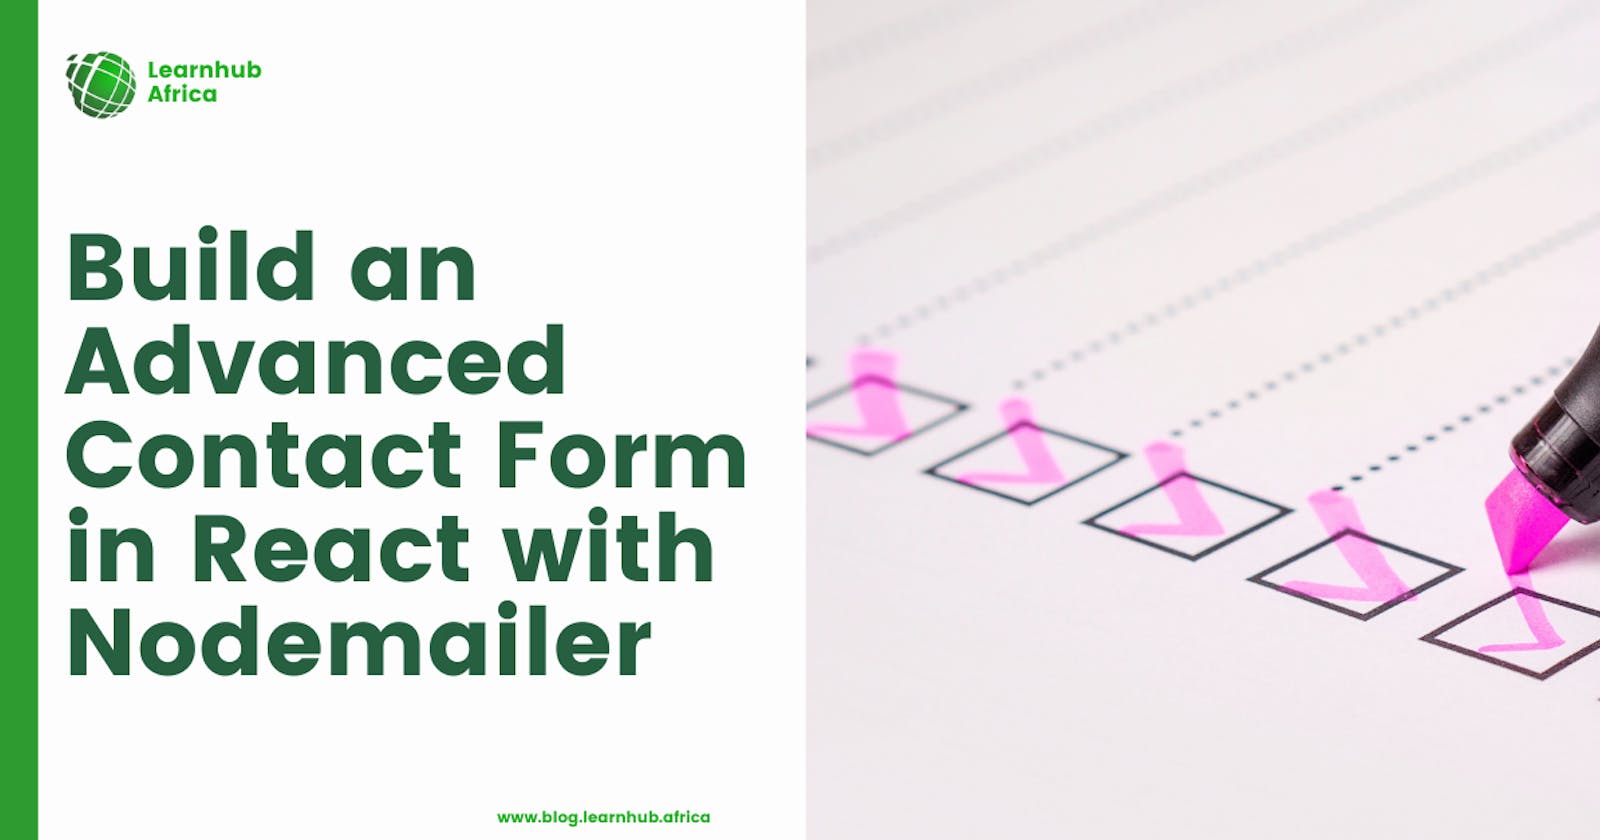 Build an Advanced Contact Form in React with Nodemailer